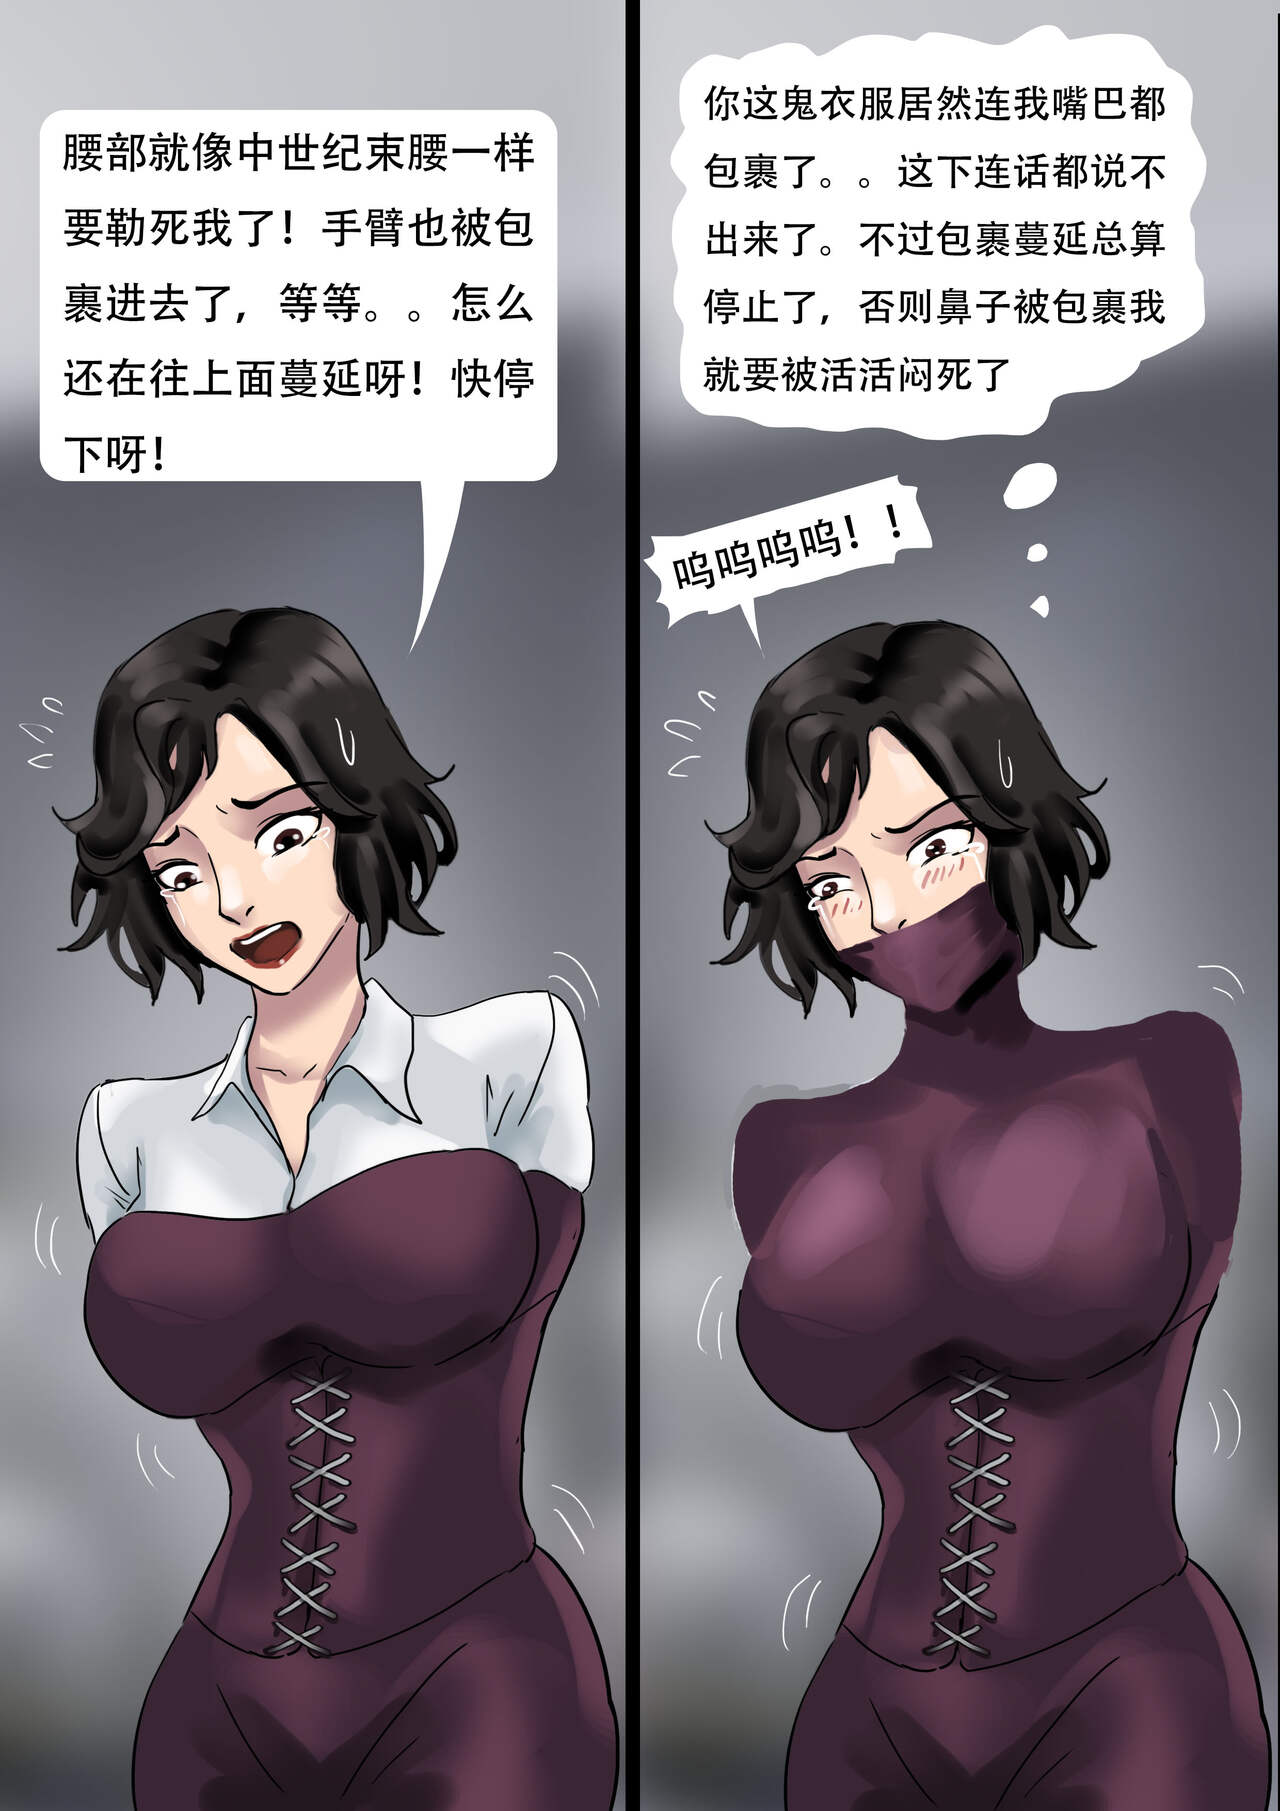 [King] 自动囚禁的情趣拘束衣 Erotic straitjacket of automatic captivity [Chinese] 